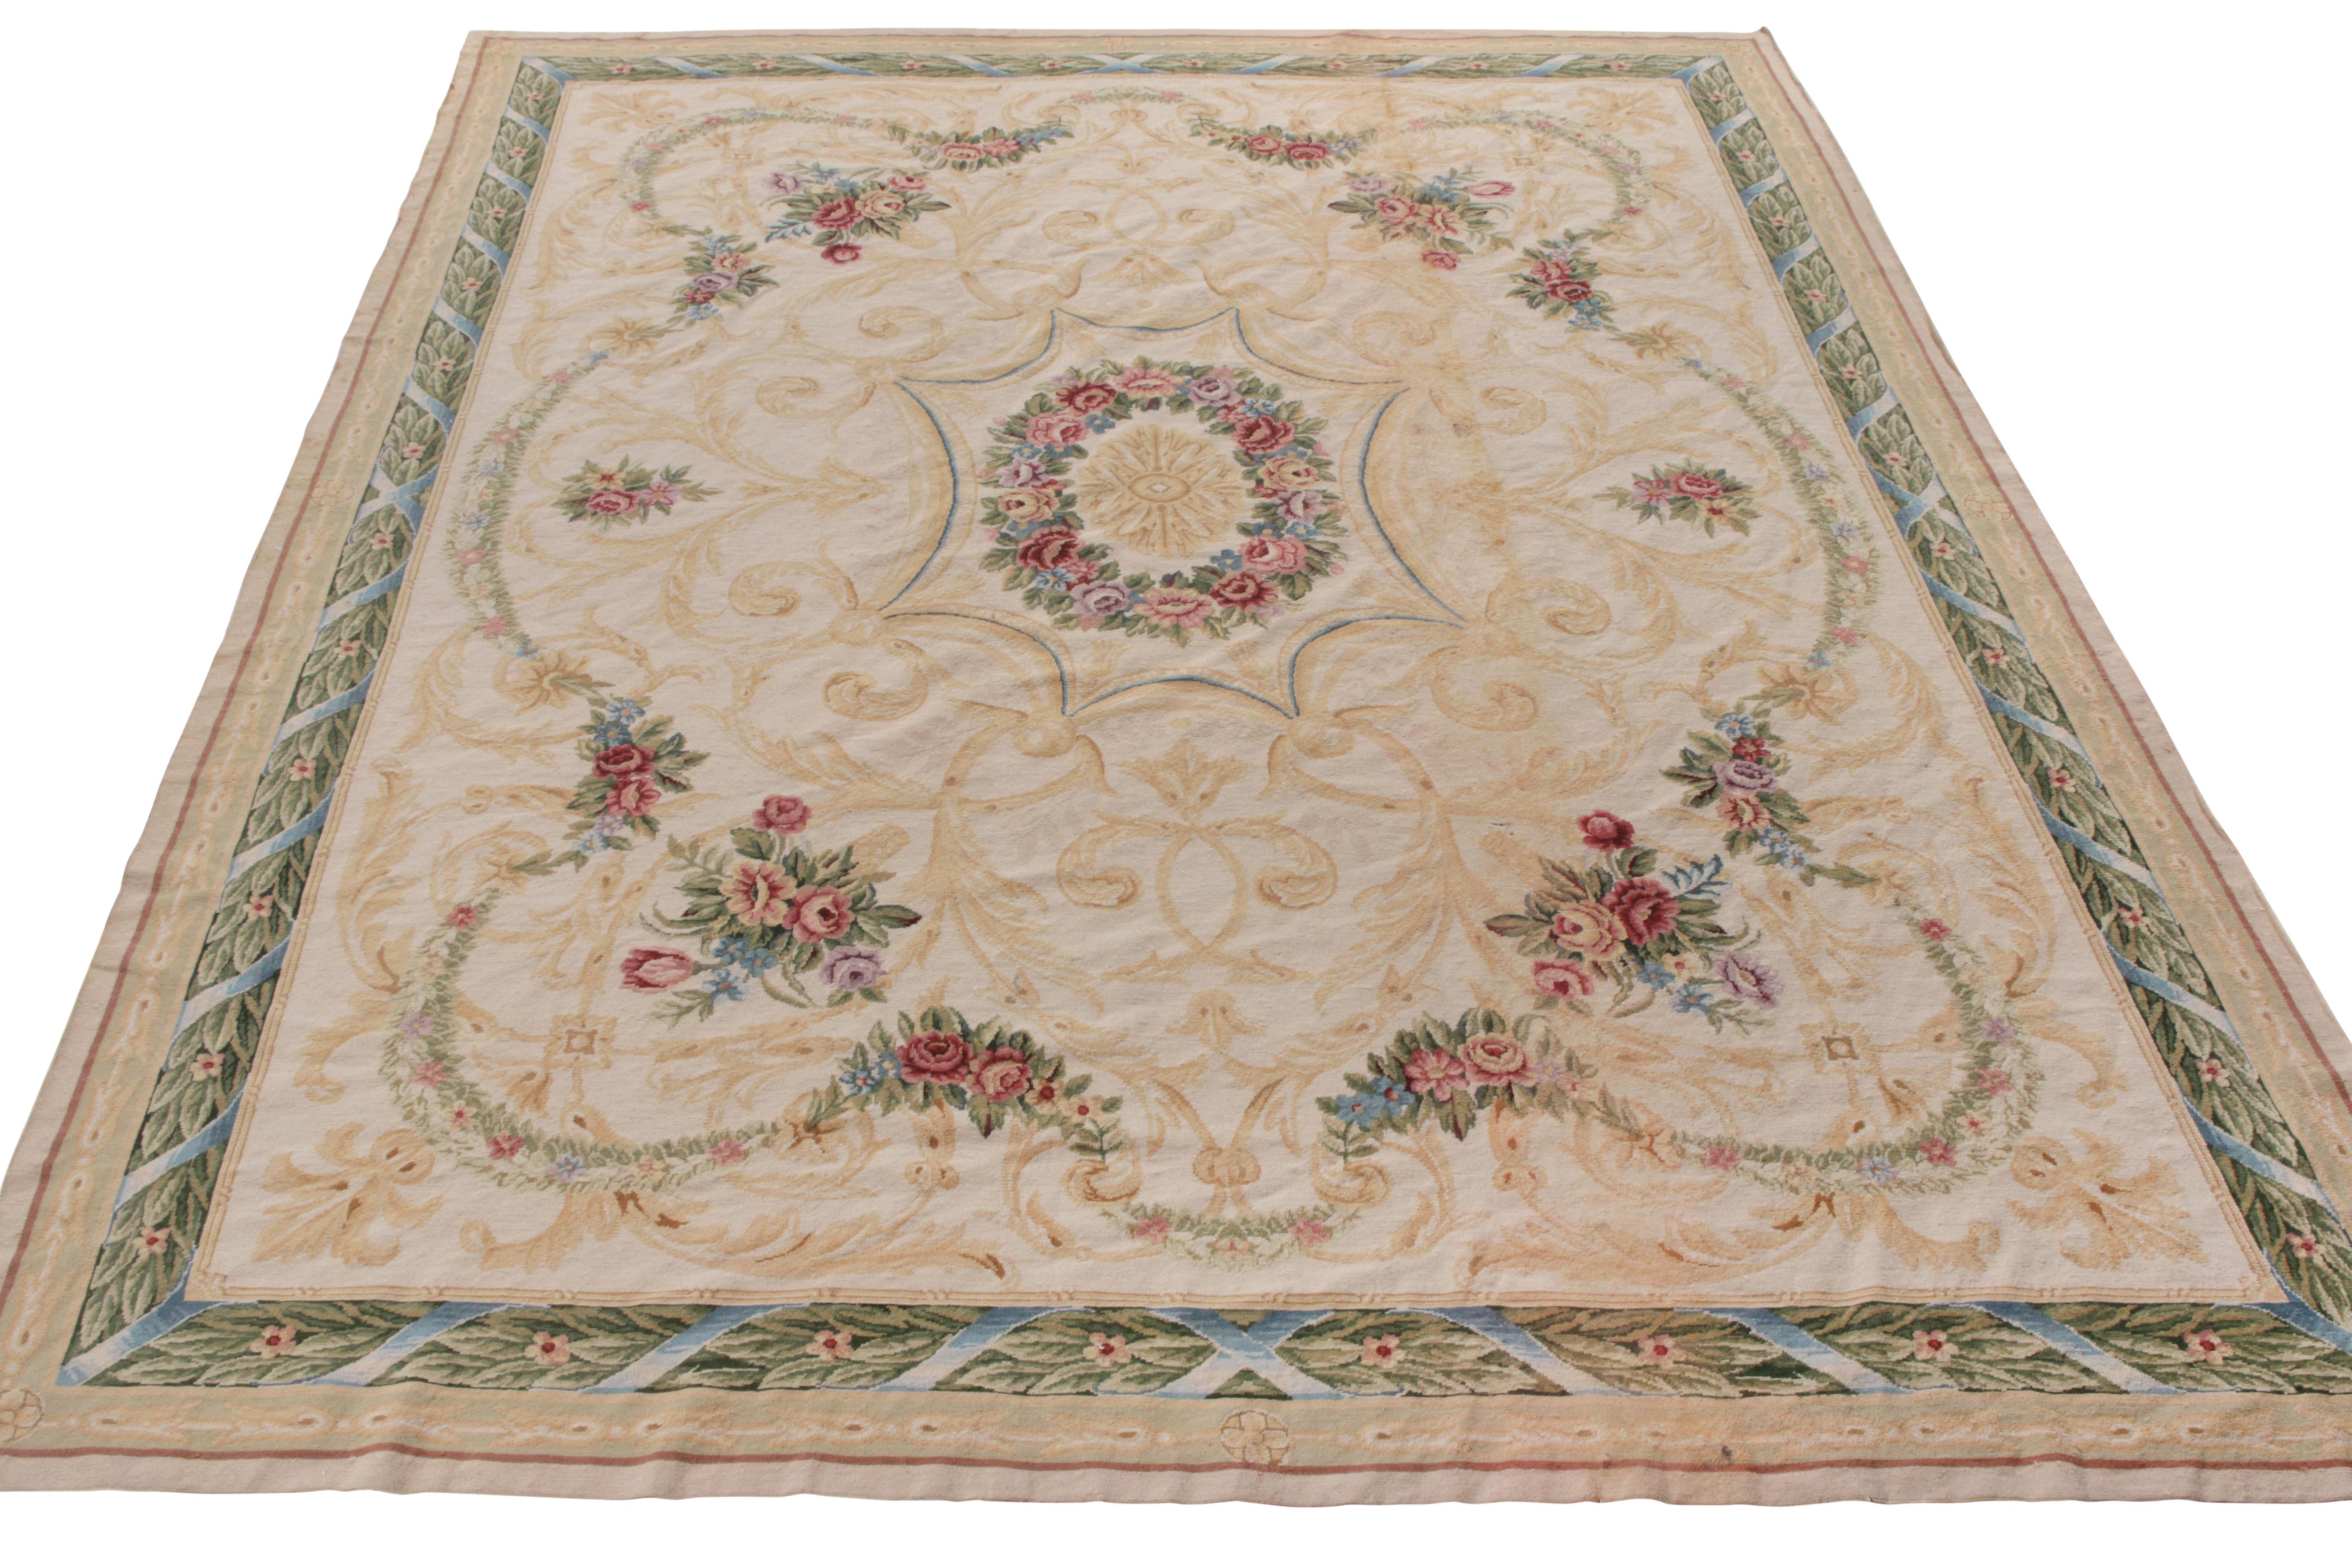 Hailing from Rug & Kilim’s European Collection, this 9x10 rug is inspired by the 18th Century Aubusson style. Handwoven in wool, the rug features a blend of classic floral and medallion patterns in a celebrated transitional colorway of luxe beige,